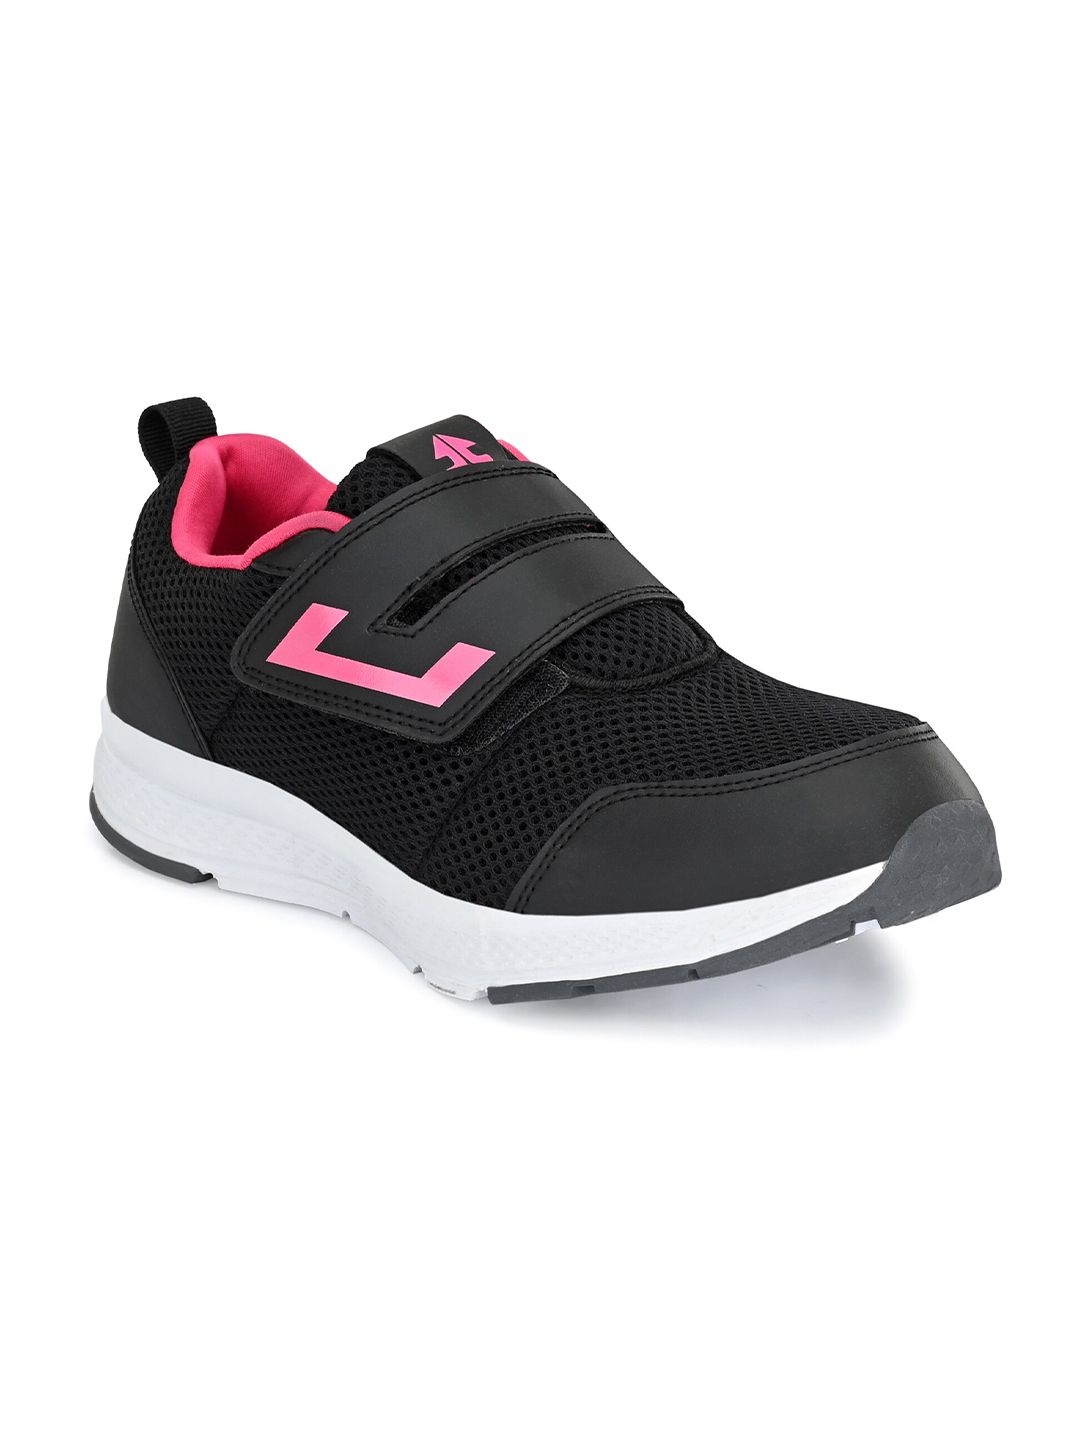 OFF LIMITS Women Black Mesh Walking Non-Marking Shoes Price in India